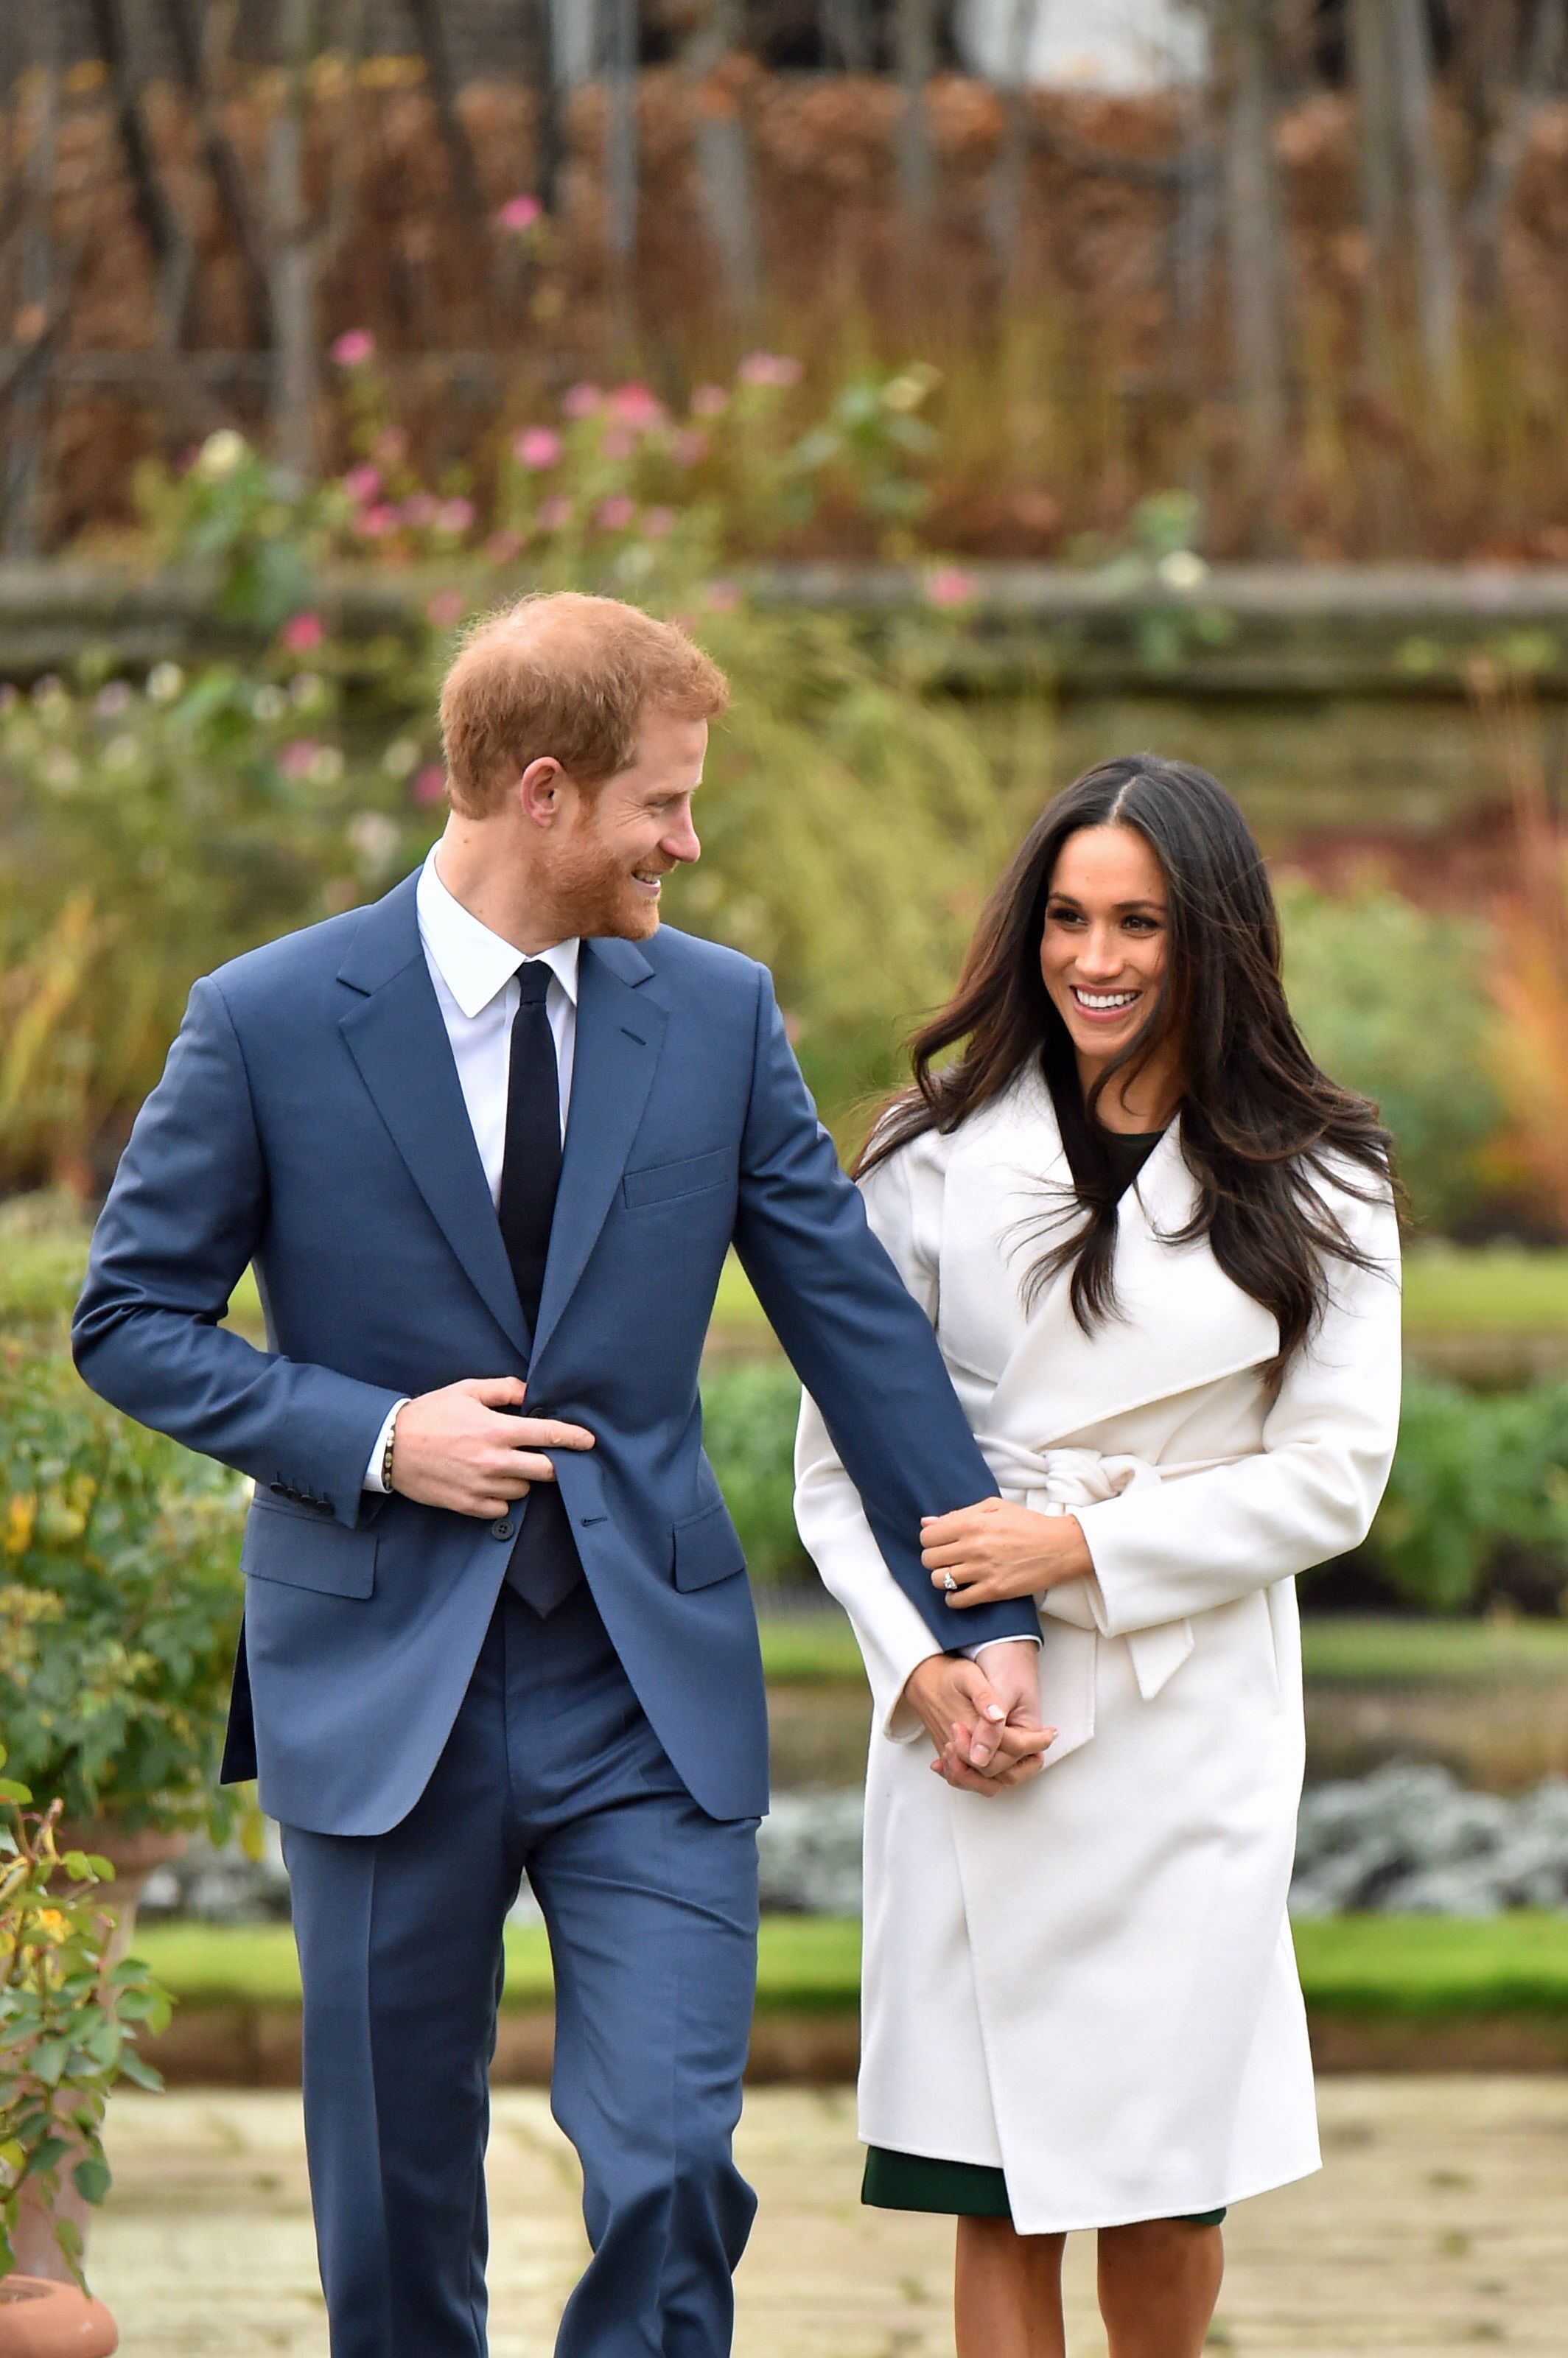 Prince Harry and Meghan Markle in the Sunken Garden at Kensington Palace, London, after the announcement of their engagement. | Source: Getty Images